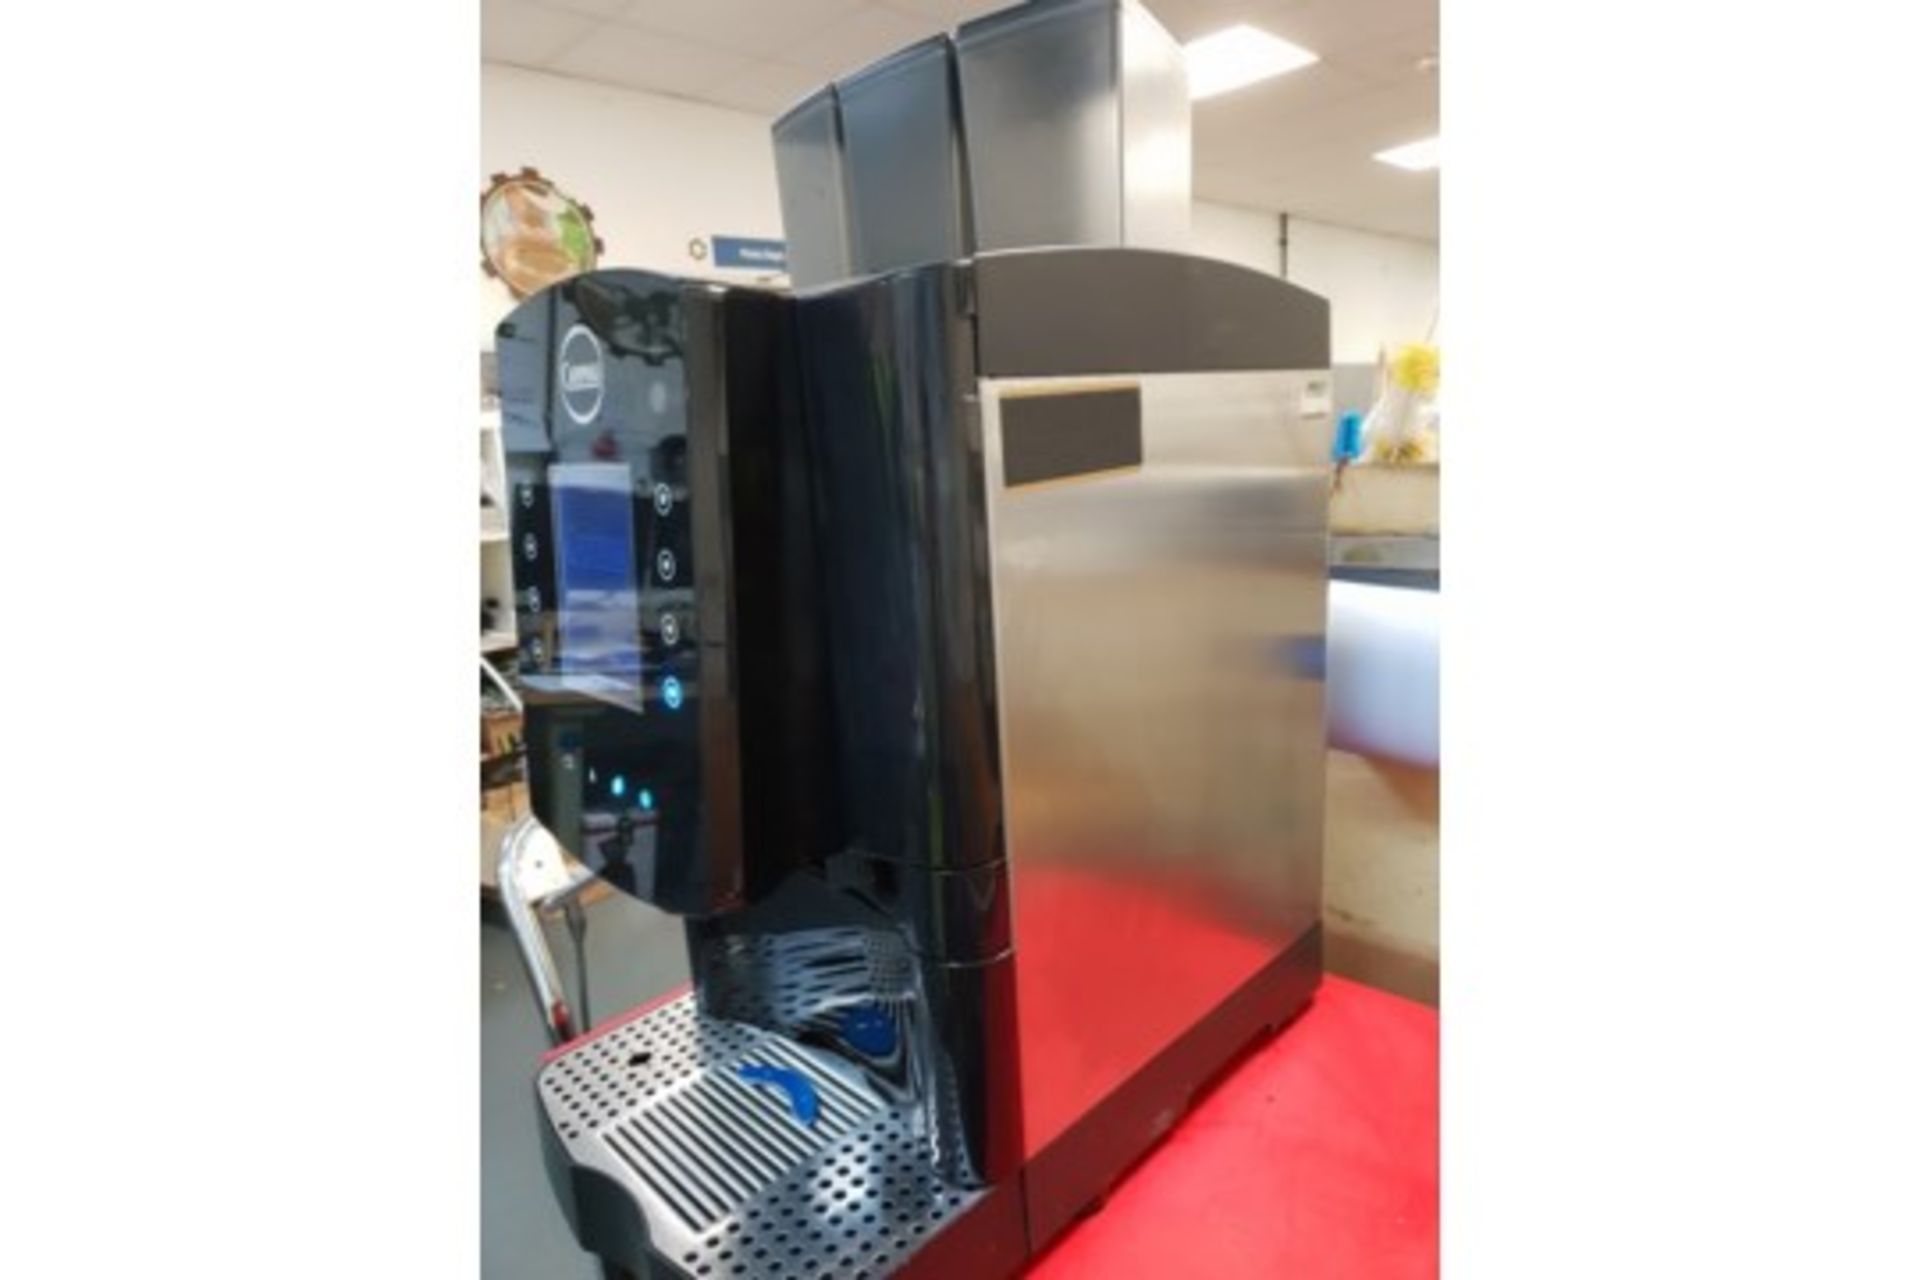 Carimali Solar Touch Drinks Machine – Bean to cup Coffee + Chocolate & Other Drinks   The Carimali - Image 2 of 6